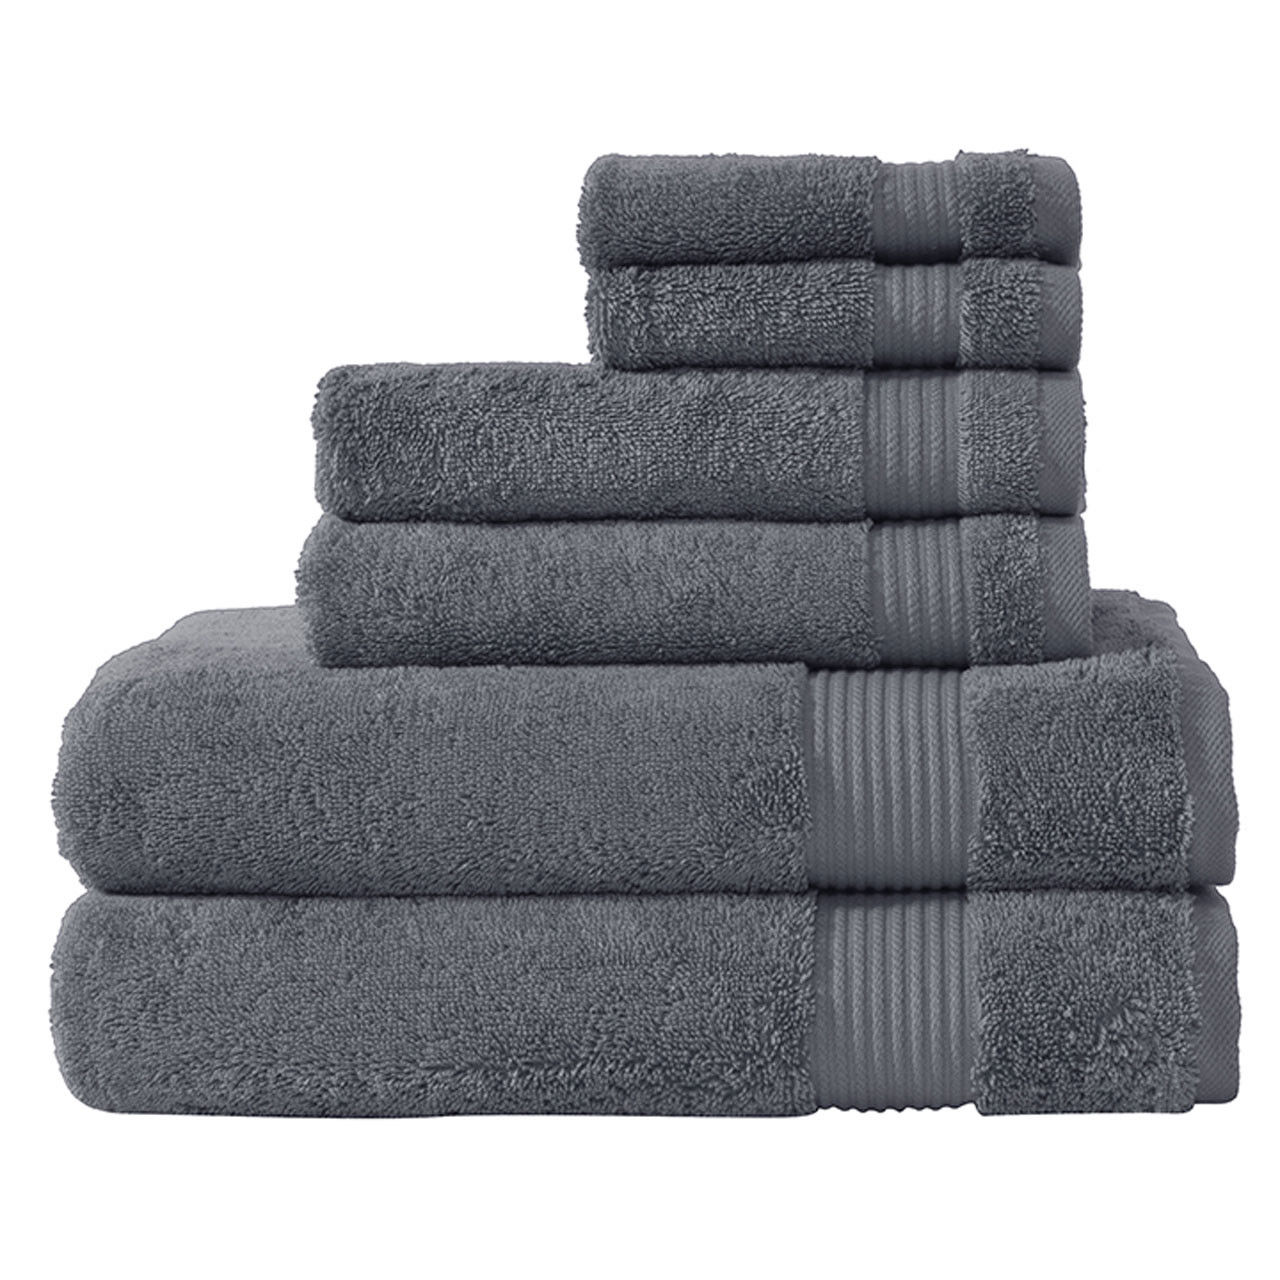 What certifications are held by the gray towels in the Amadeus Turkish Collection?